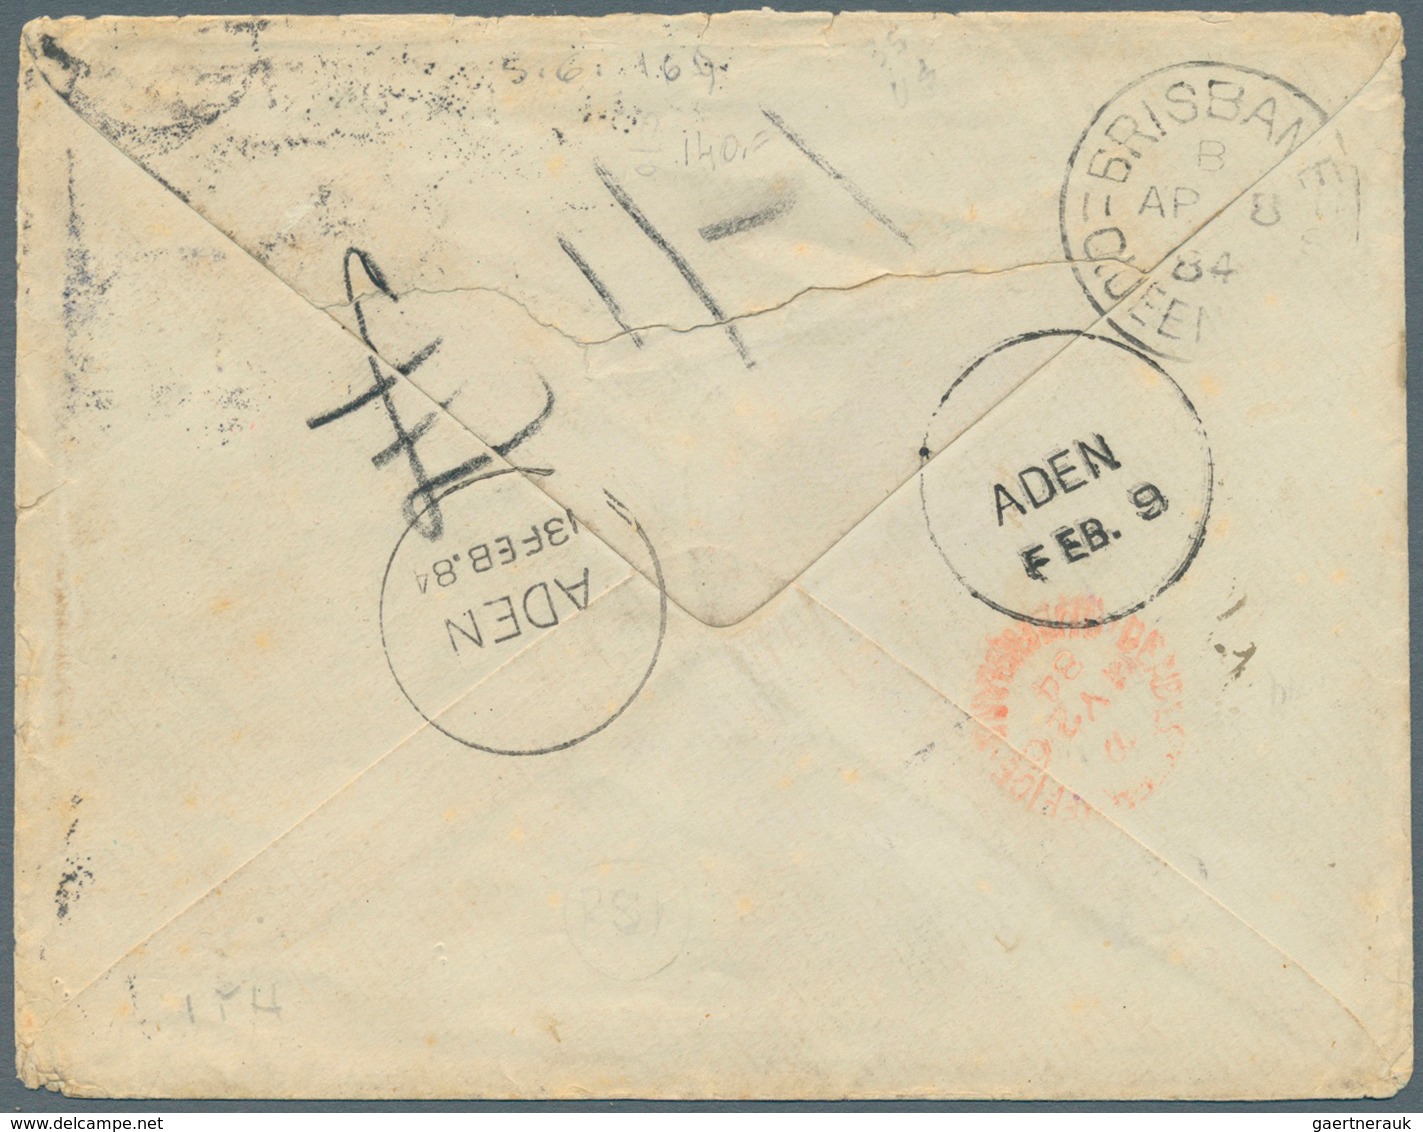 Aden: 1884-85 Cover From London Addressed To ADEN, Redirected To BRISBANE, QUEENSLAND Franked GB 5d. - Yémen